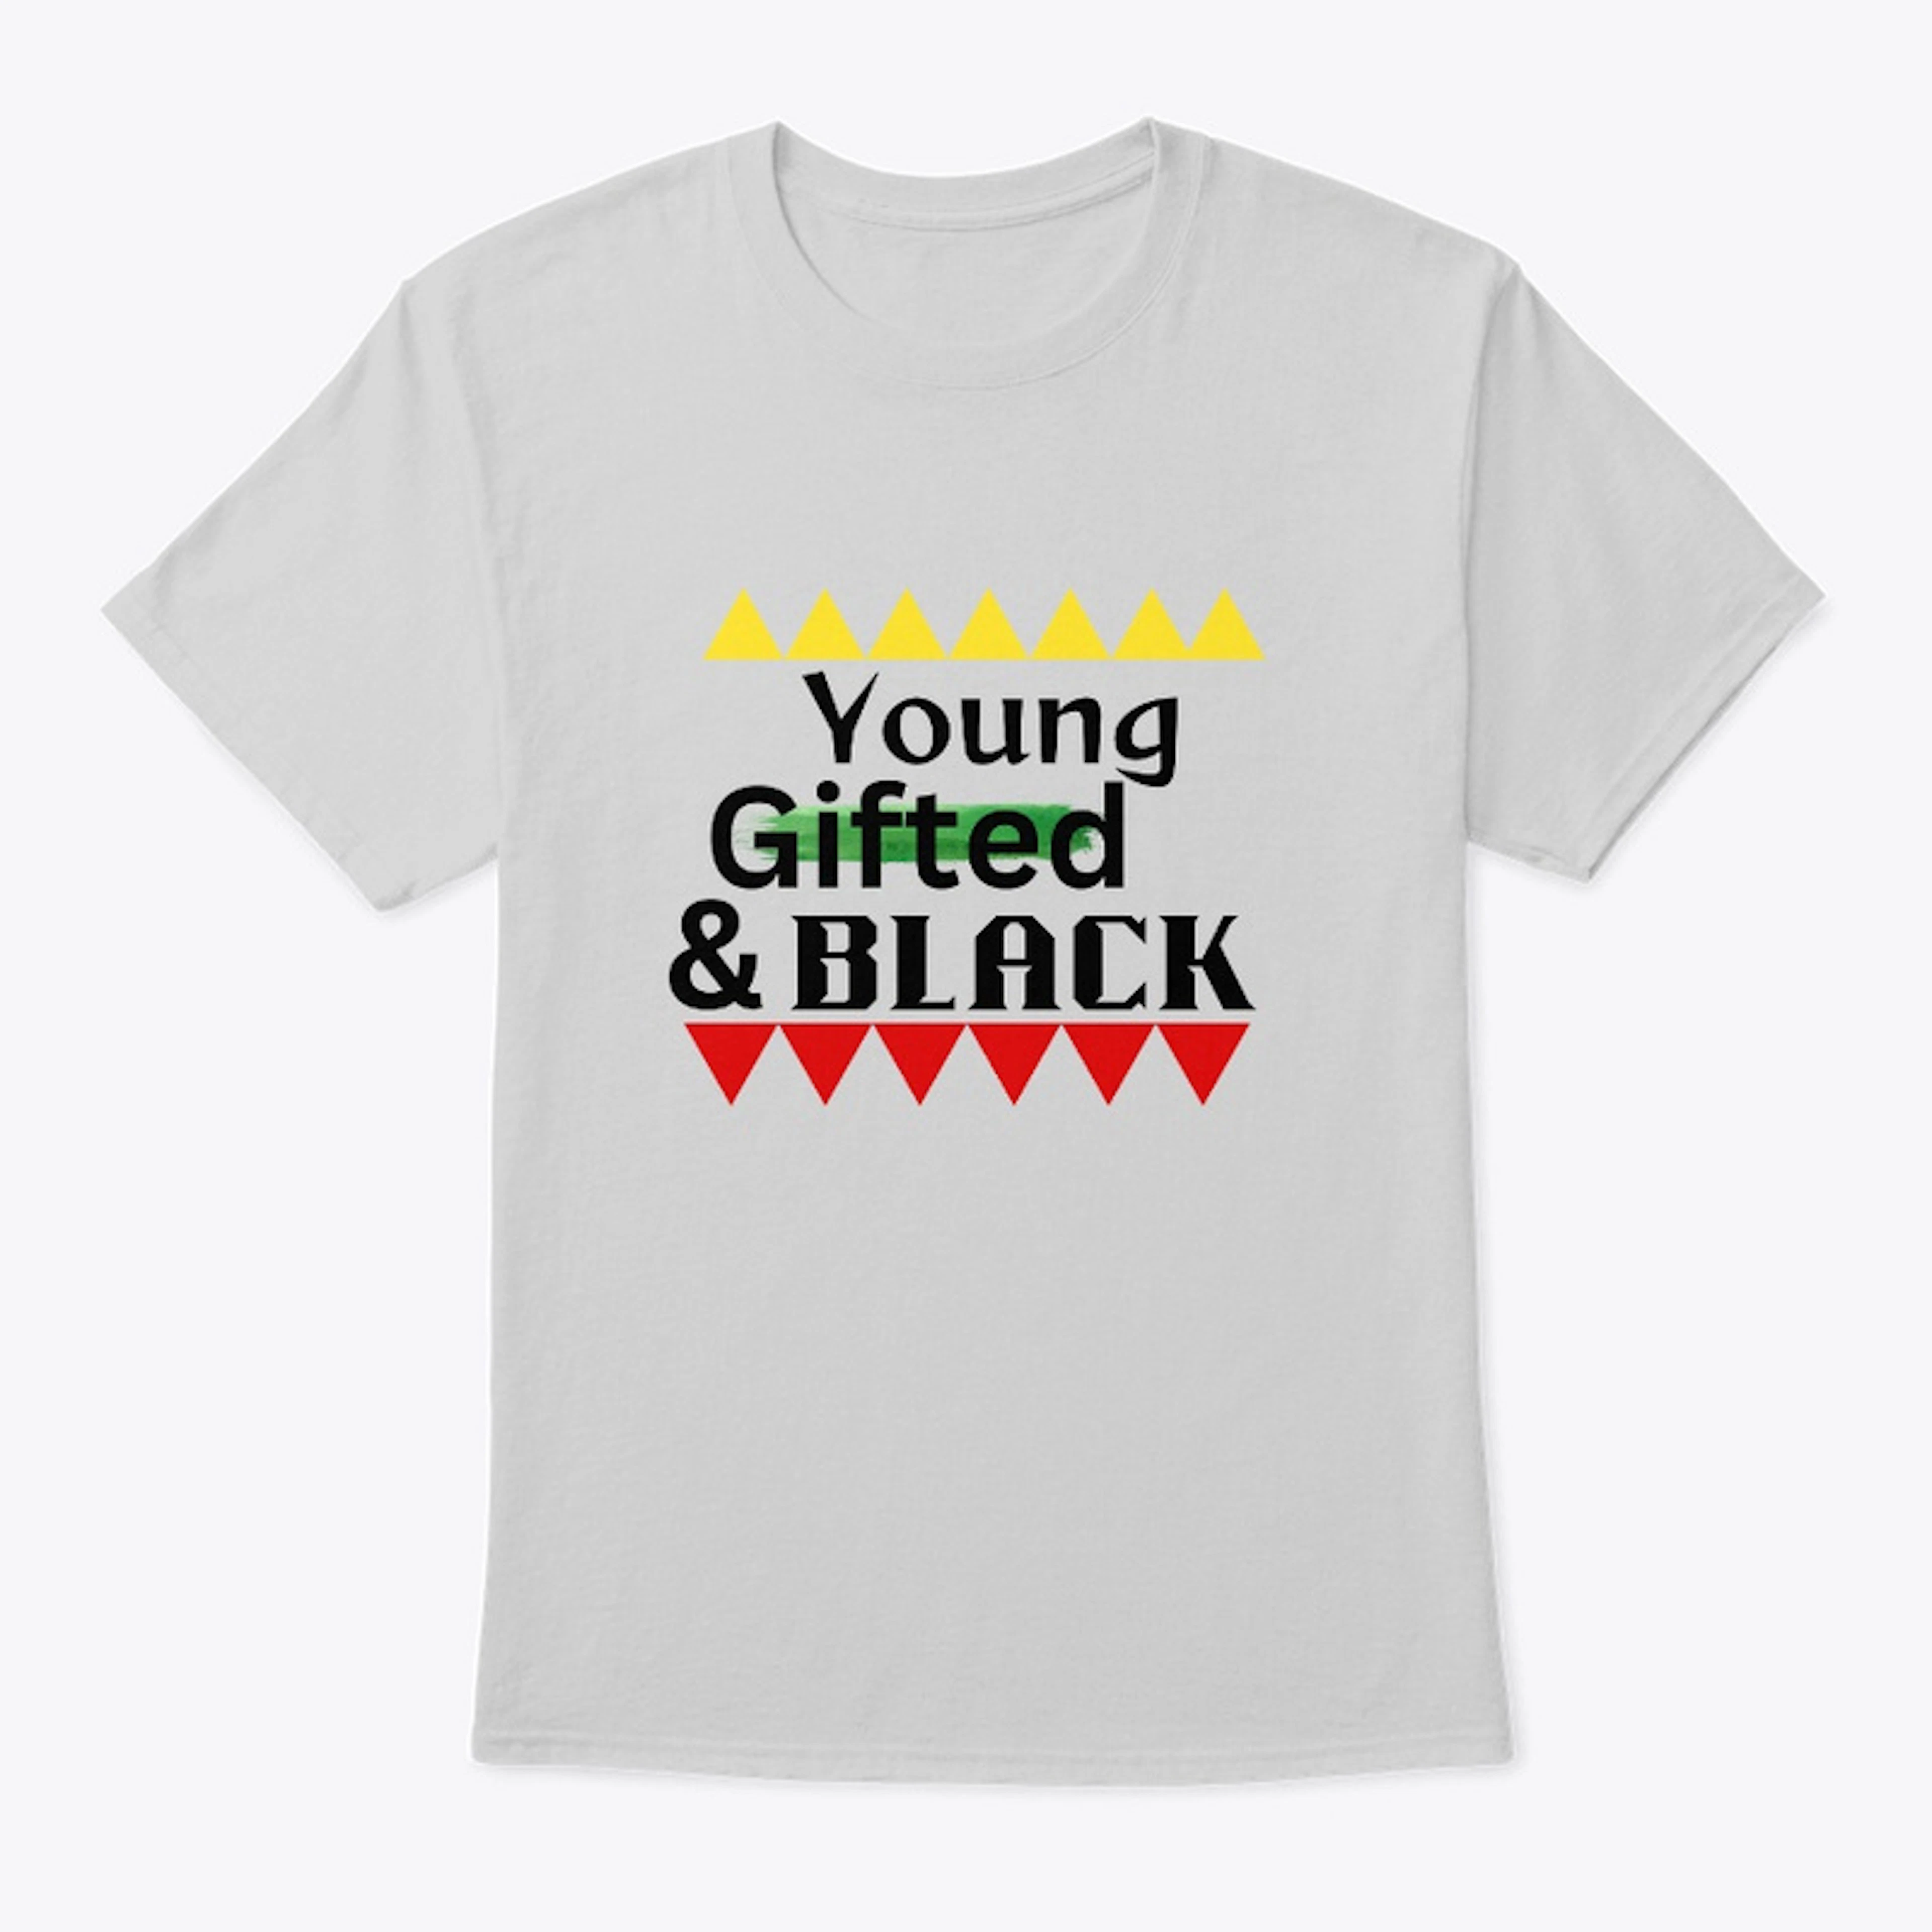 Young, Gifted & Black